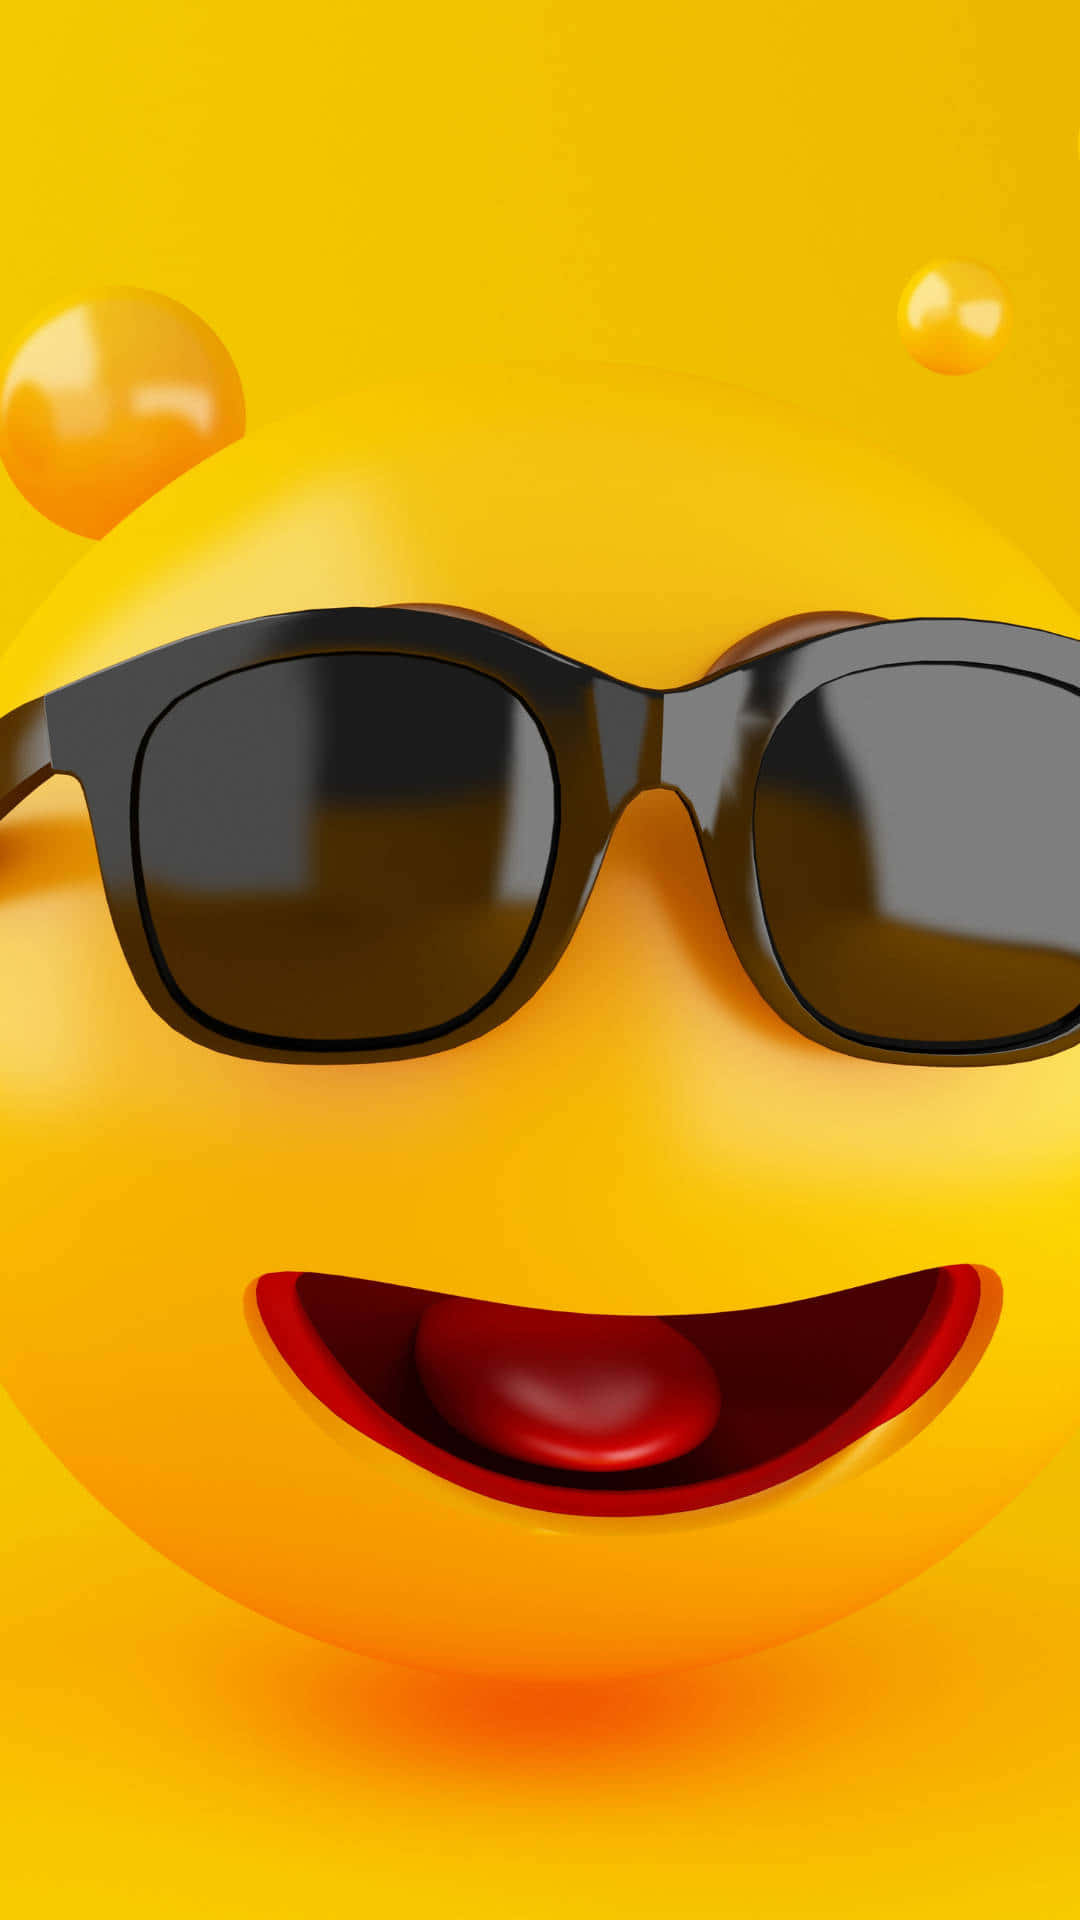 A Smile From Ear-to-ear With This Cheerful And Cute Emoji Wallpaper